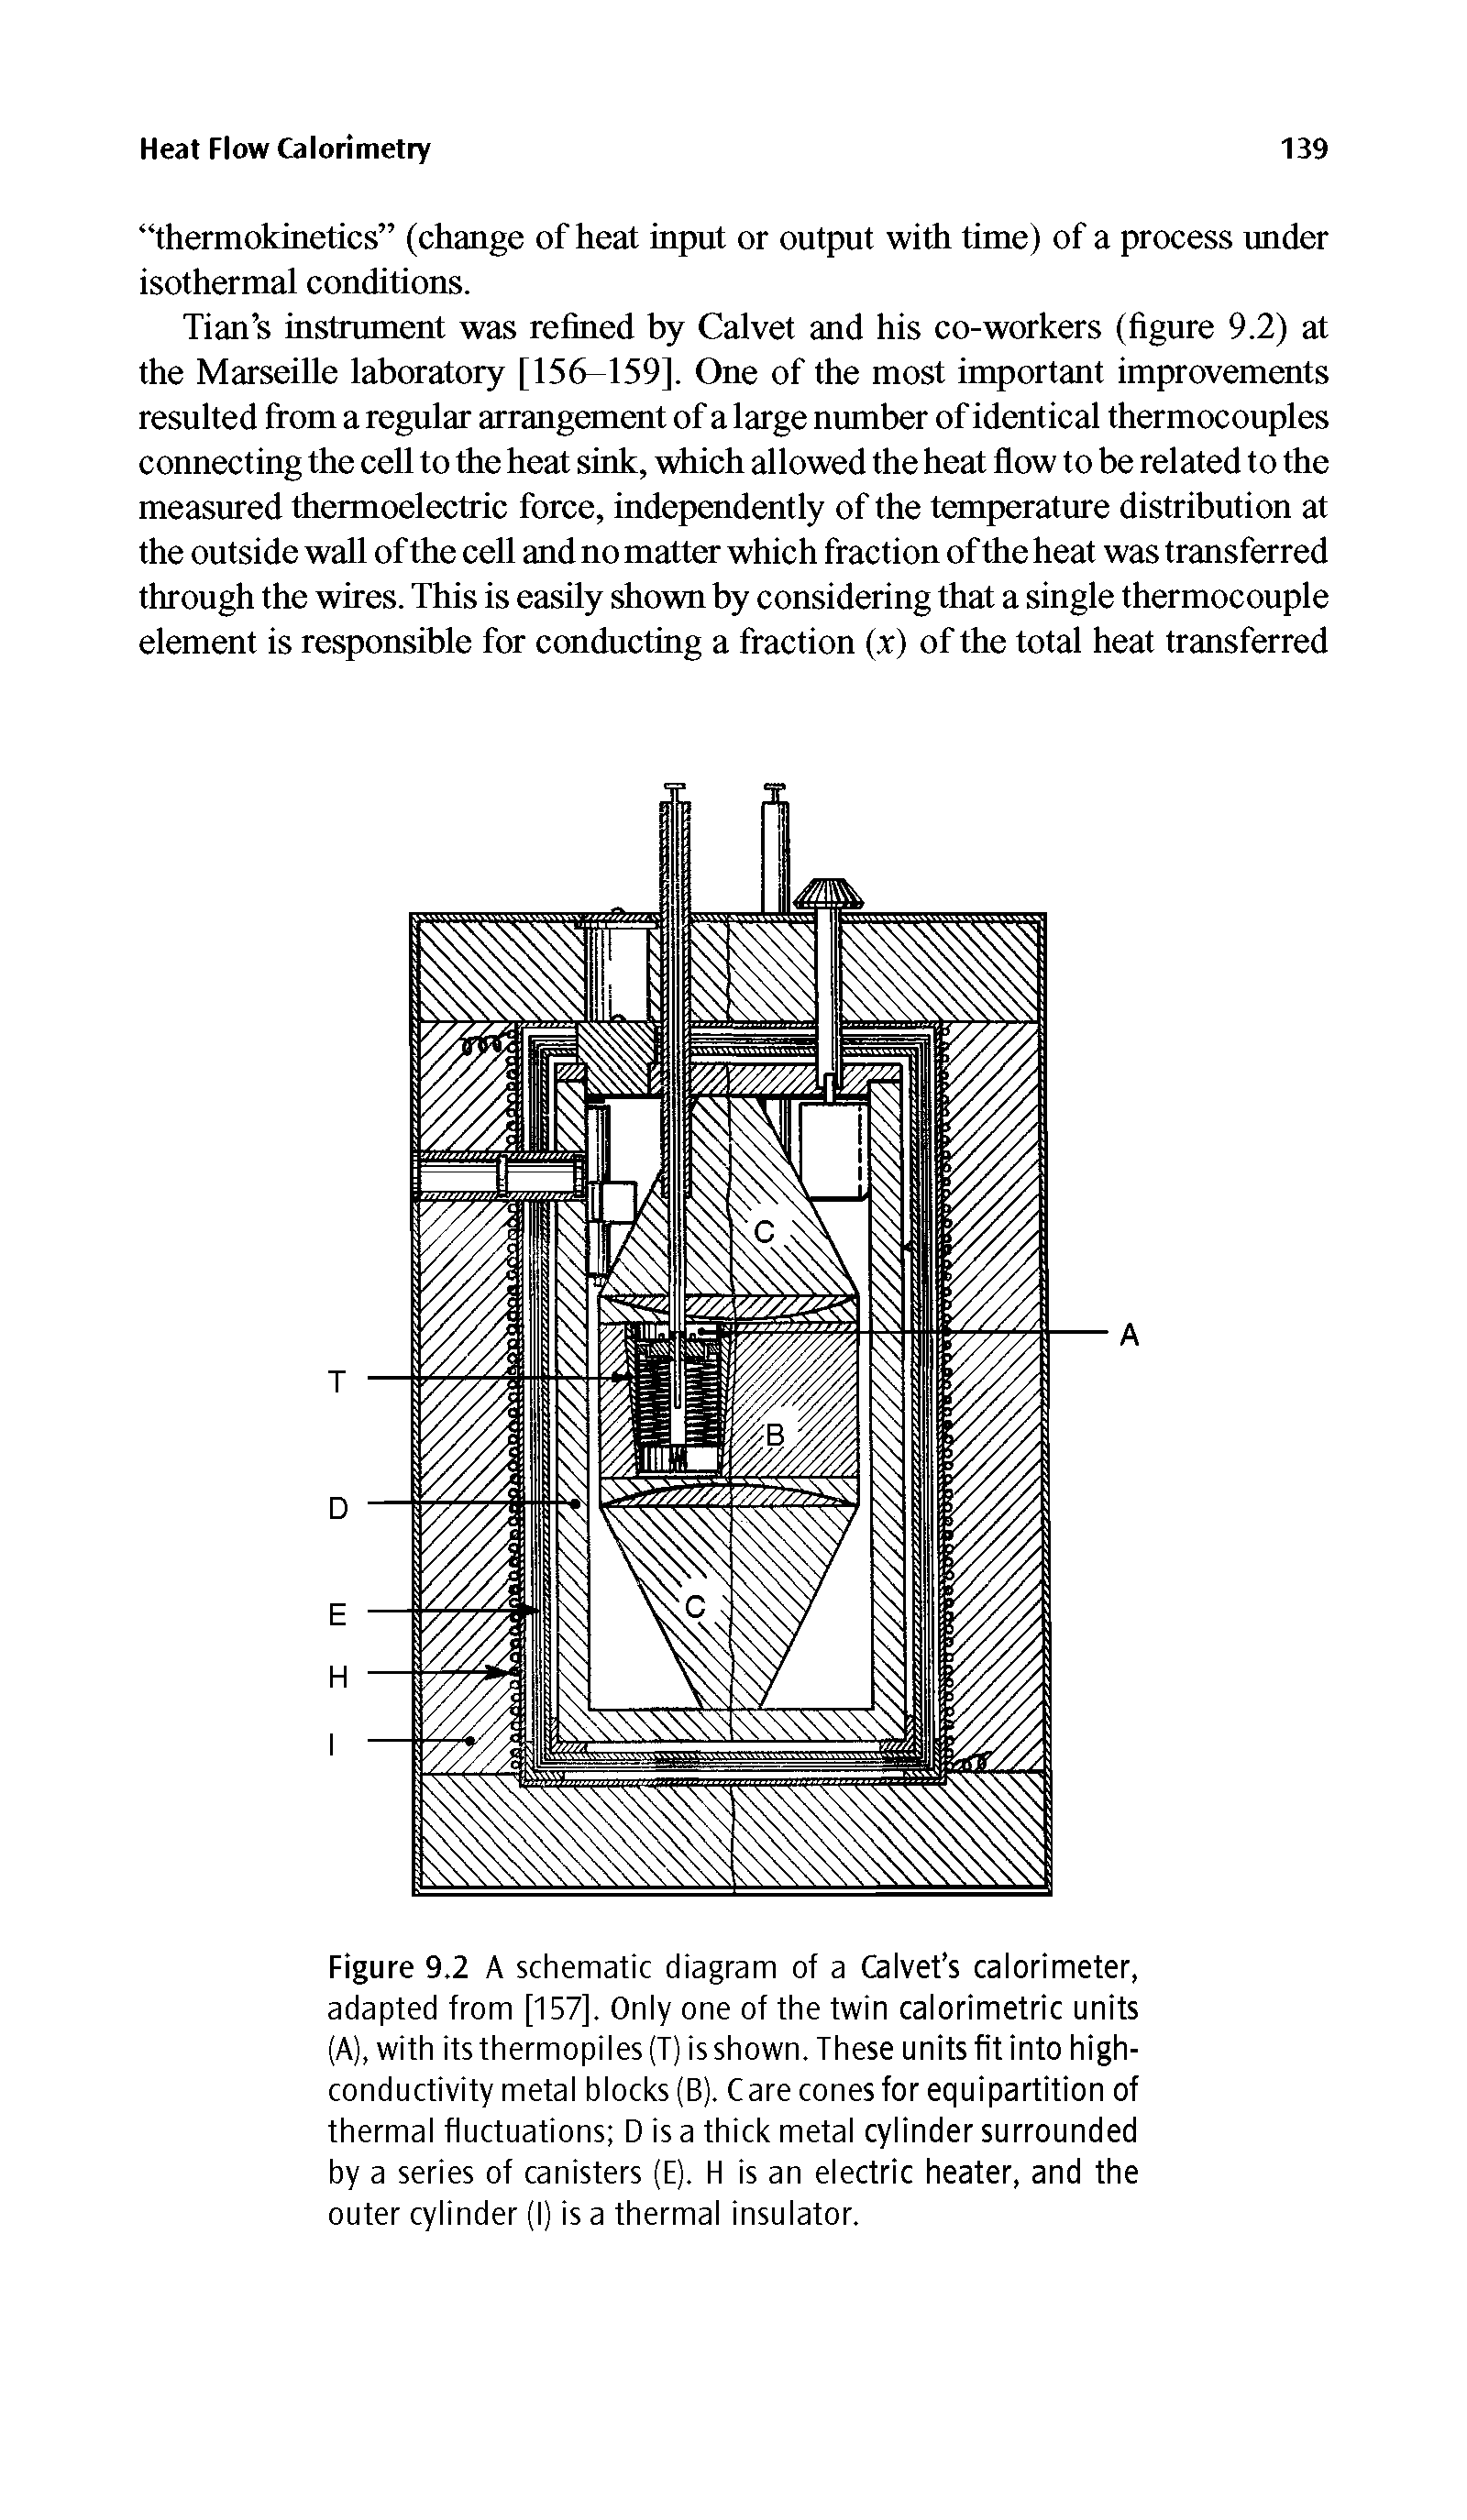 Figure 9.2 A schematic diagram of a Calvet s calorimeter, adapted from [157], Only one of the twin calorimetric units (A), with its thermopiles (T) is shown. These units fit into high-conductivity metal blocks (B). Care cones for equipartition of thermal fluctuations D is a thick metal cylinder surrounded by a series of canisters (E). H is an electric heater, and the outer cylinder (I) is a thermal insulator.